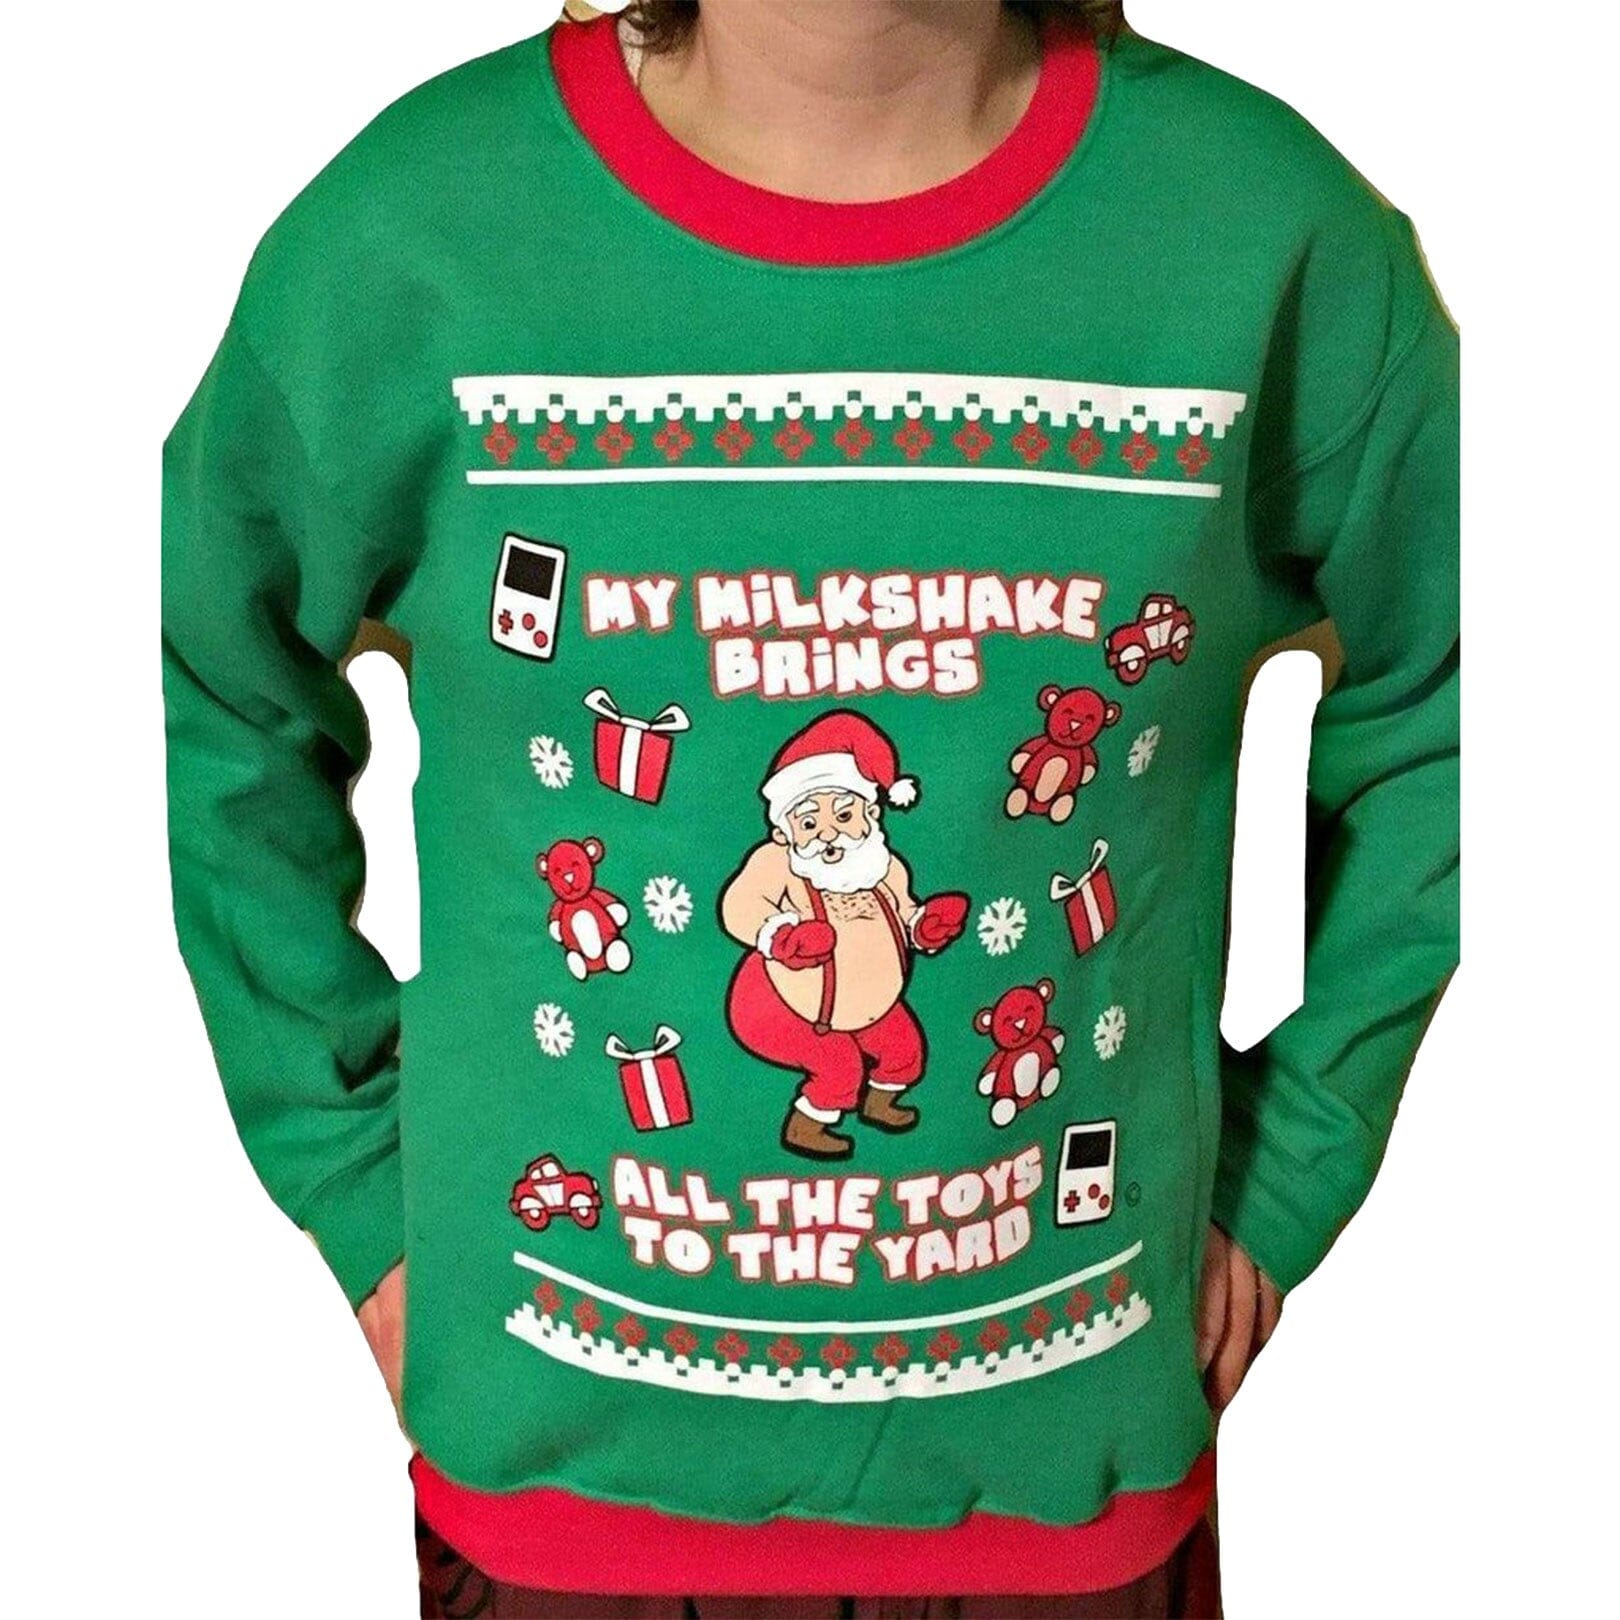 MILKSHAKE - Green with Red "Ugly" Christmas Sweaters Snowtorious Unisex - Small Green 